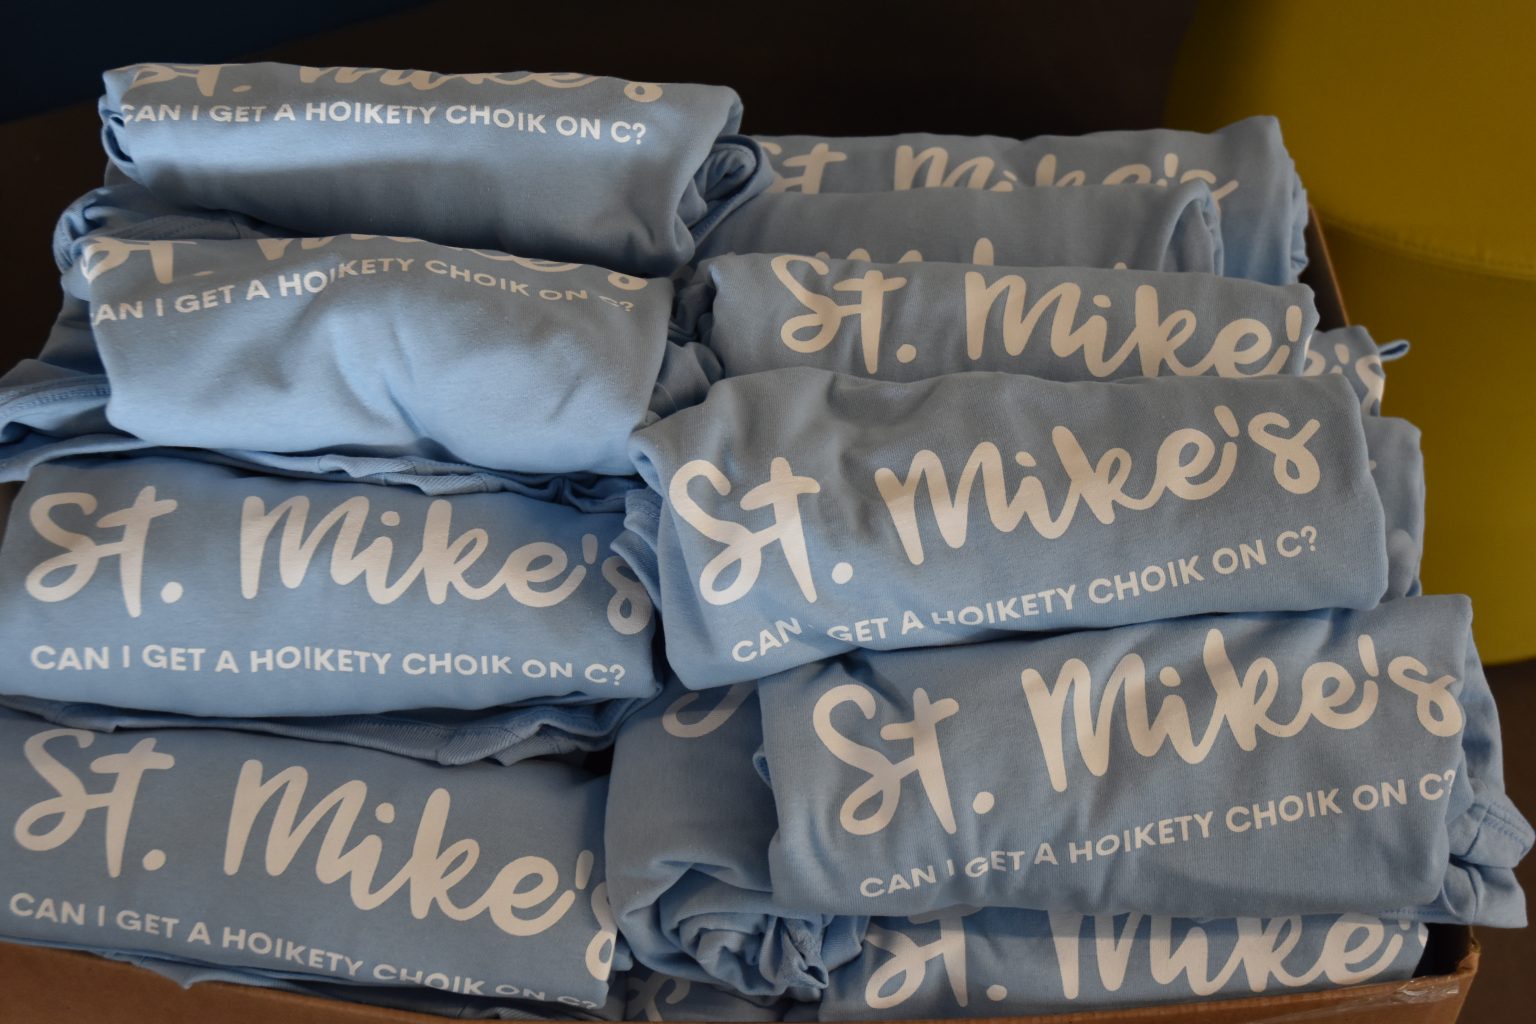 Photograph of two stacks of light blue tshirts with the text "St. Mike's" in large script font and "Can I get a Hoikety Choik on C?" written below. 